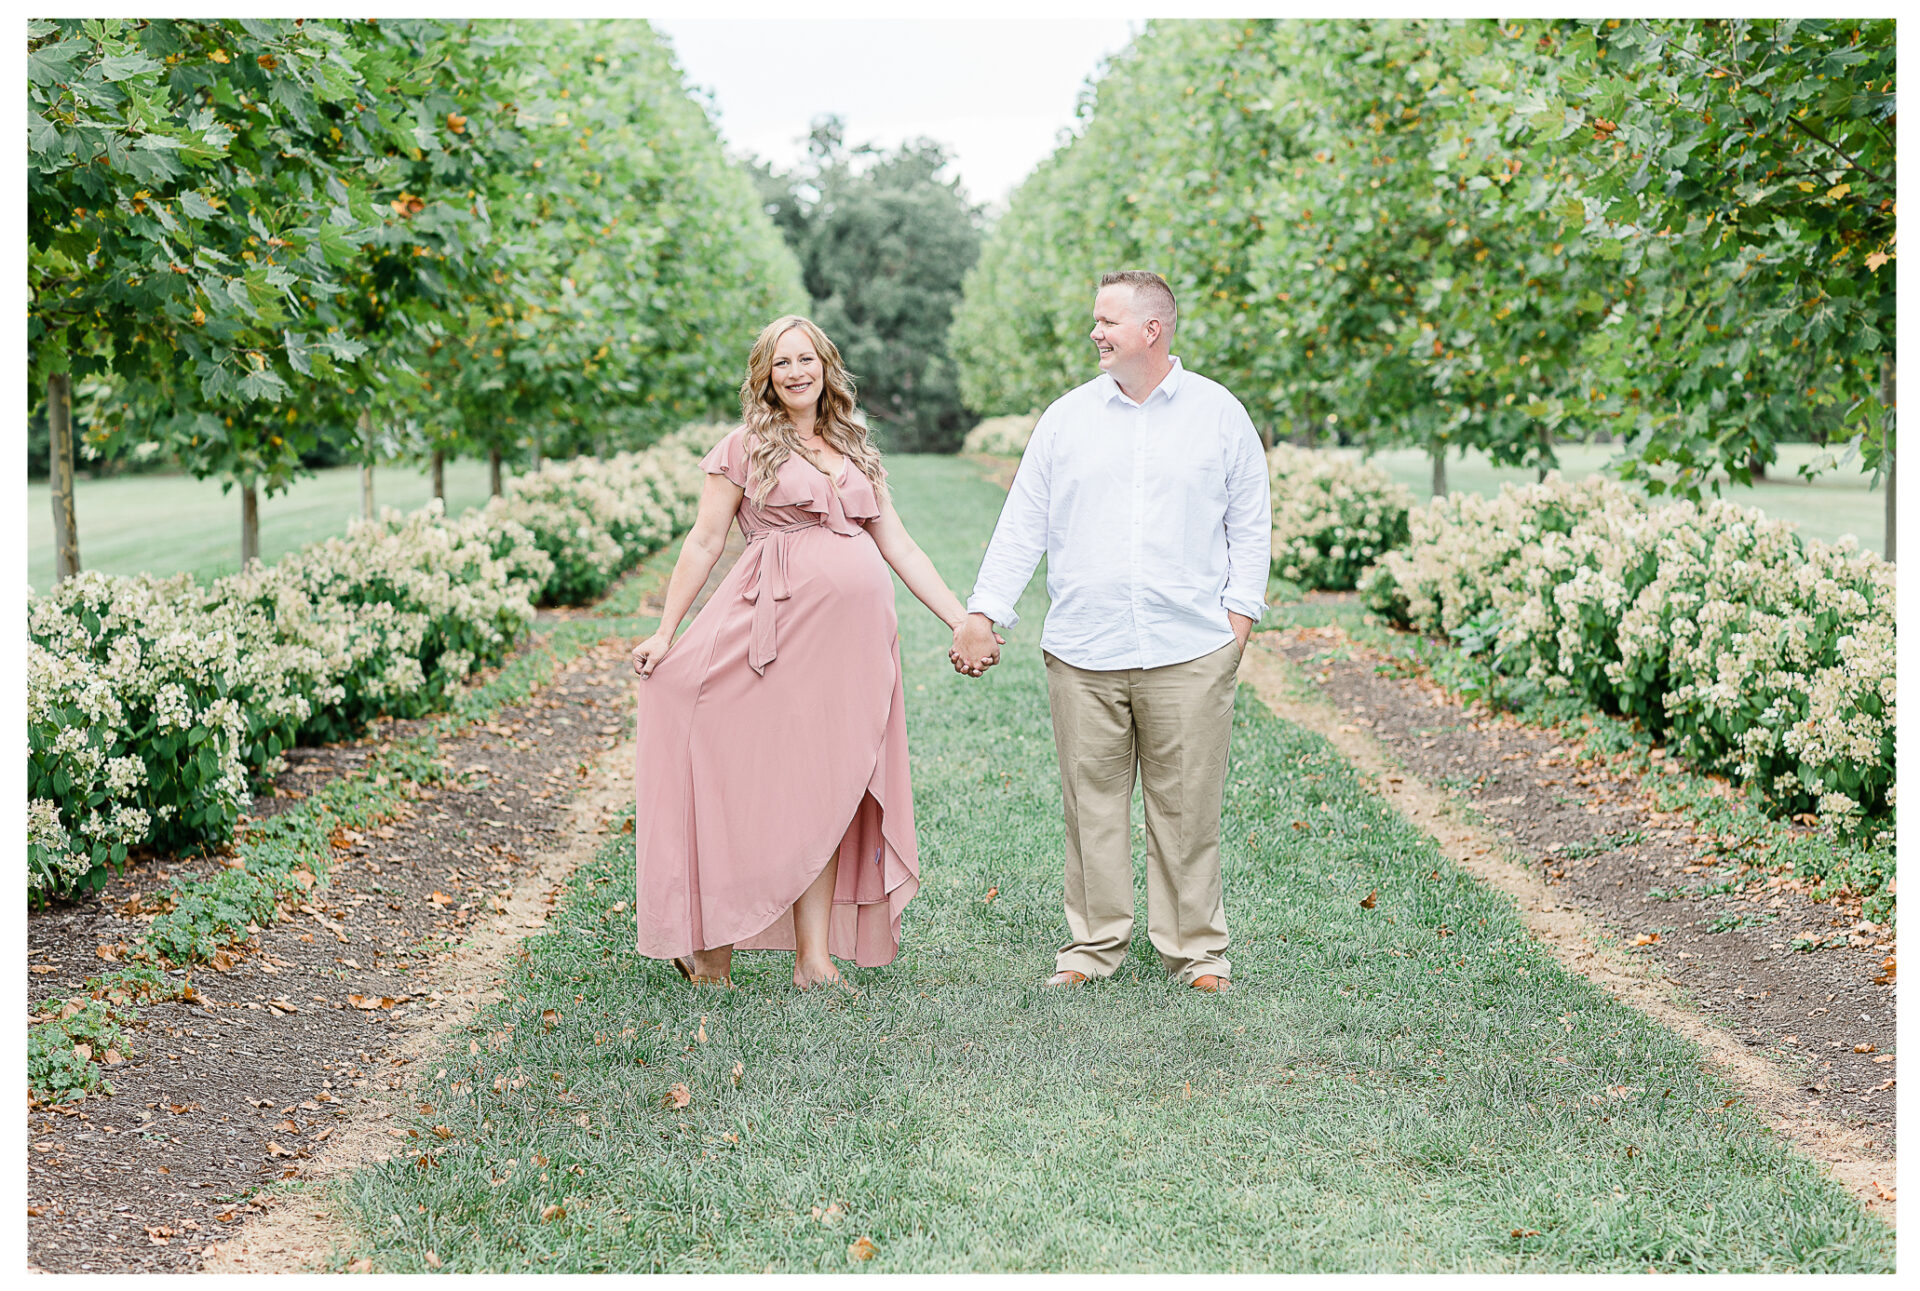 Winter Freire Photography | Dayton OH maternity photography | organic natural light photographers Cincinnati and Dayton Ohio | Organic Family Maternity Session Centerville OH